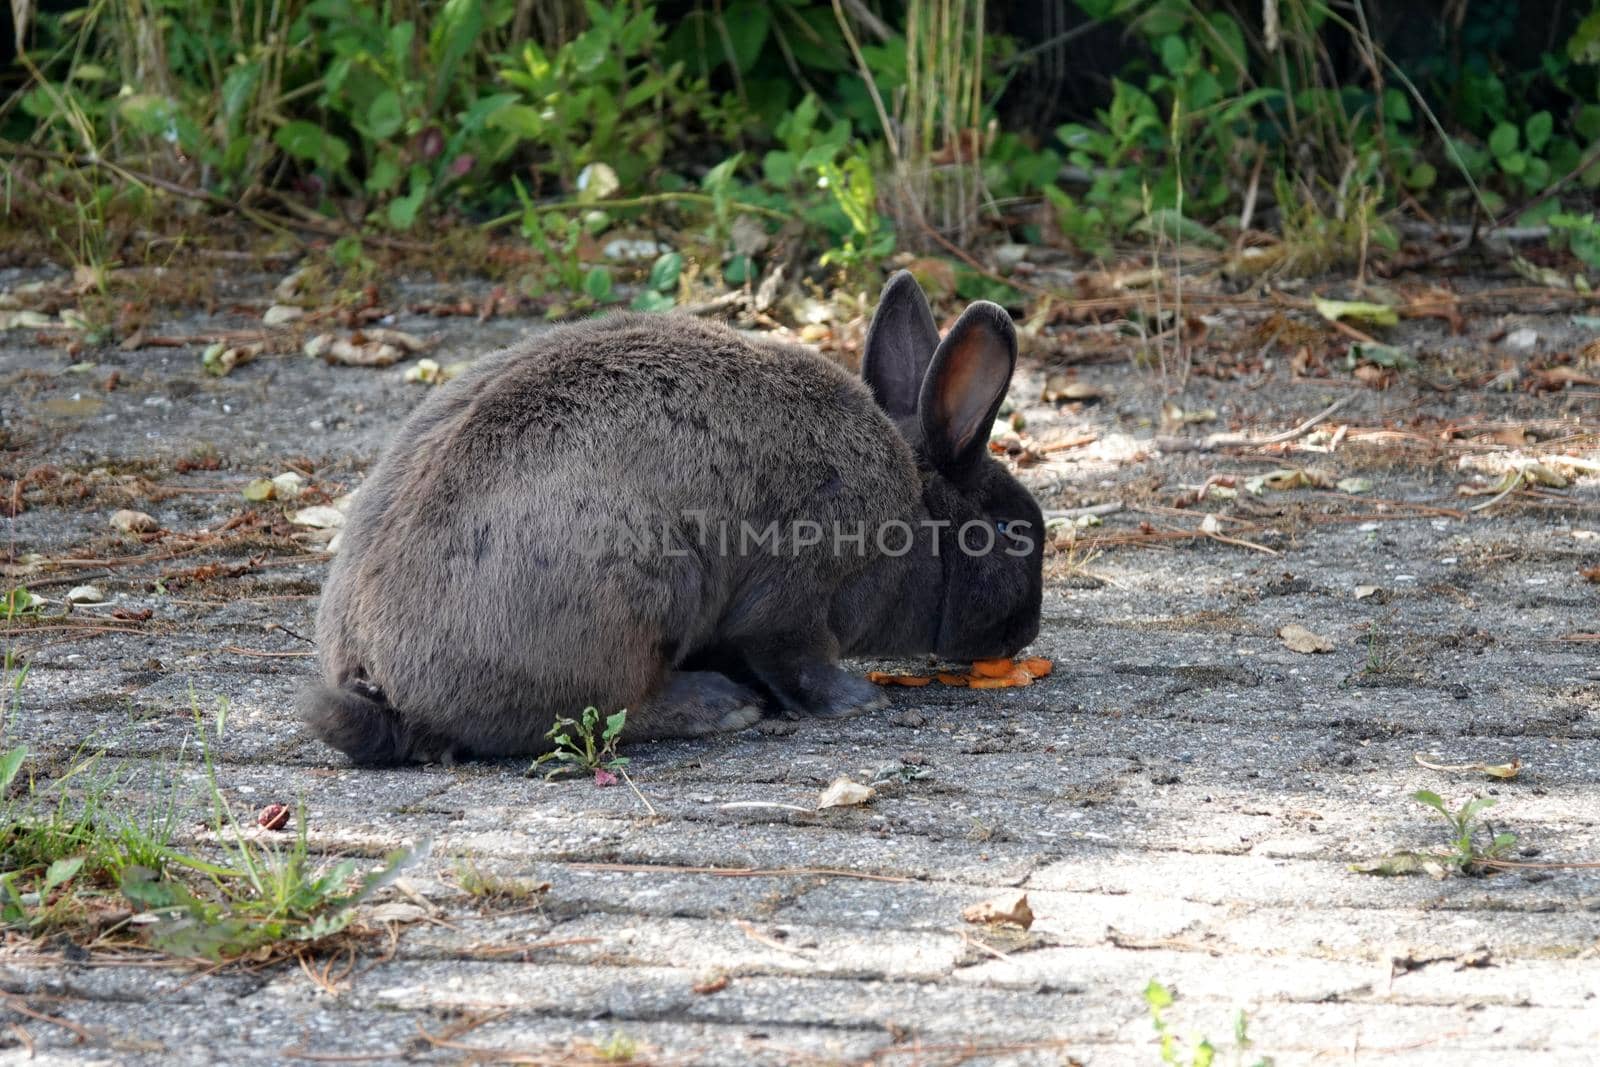 A grey rabbit eating a carrot. It's a pet that was allowed to move free around the house. 